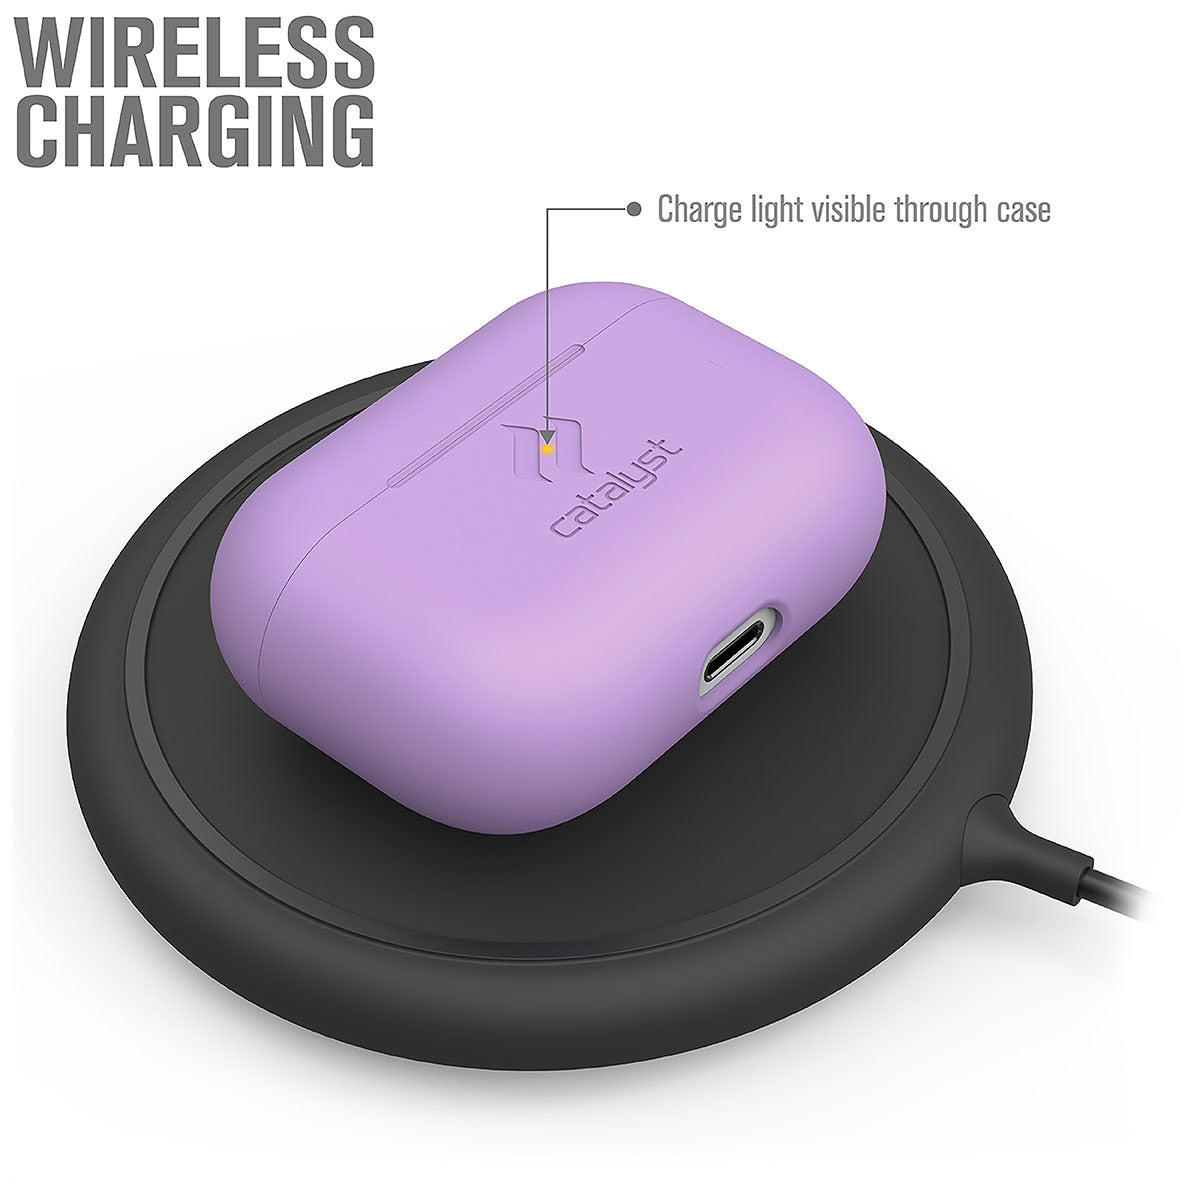 Catalyst airpods pro gen 2/1 slim case showing wireless charging of the case in a lilac colorway